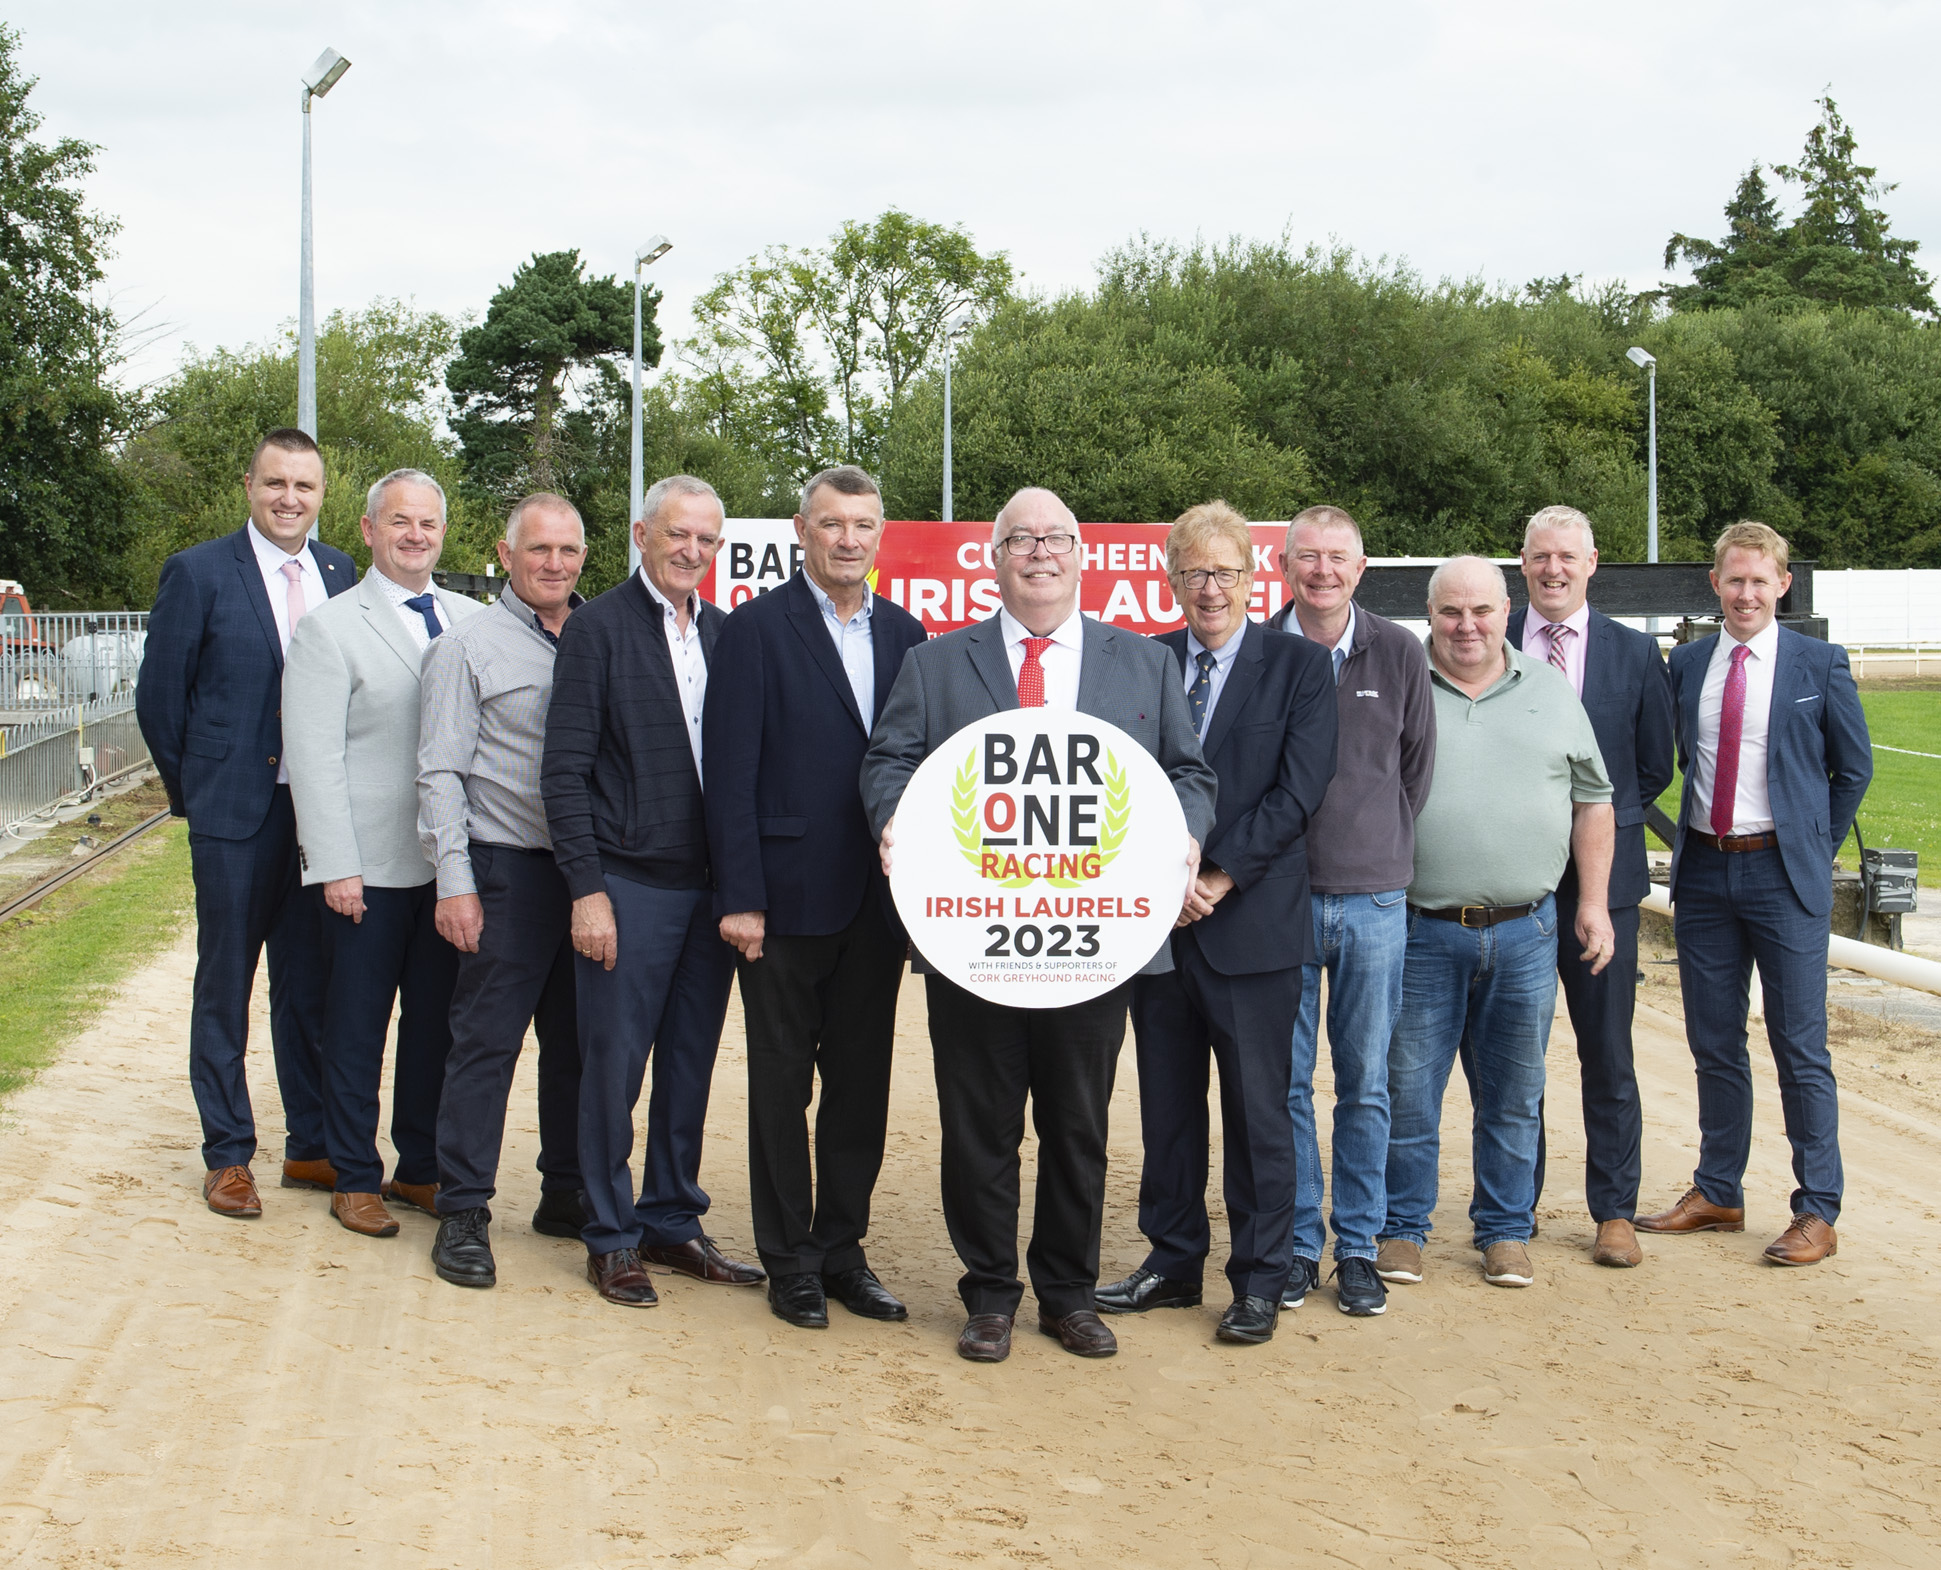 The Launch of the partnership announcement of Bar One Racing and Friends of Cork Greyhound Racing